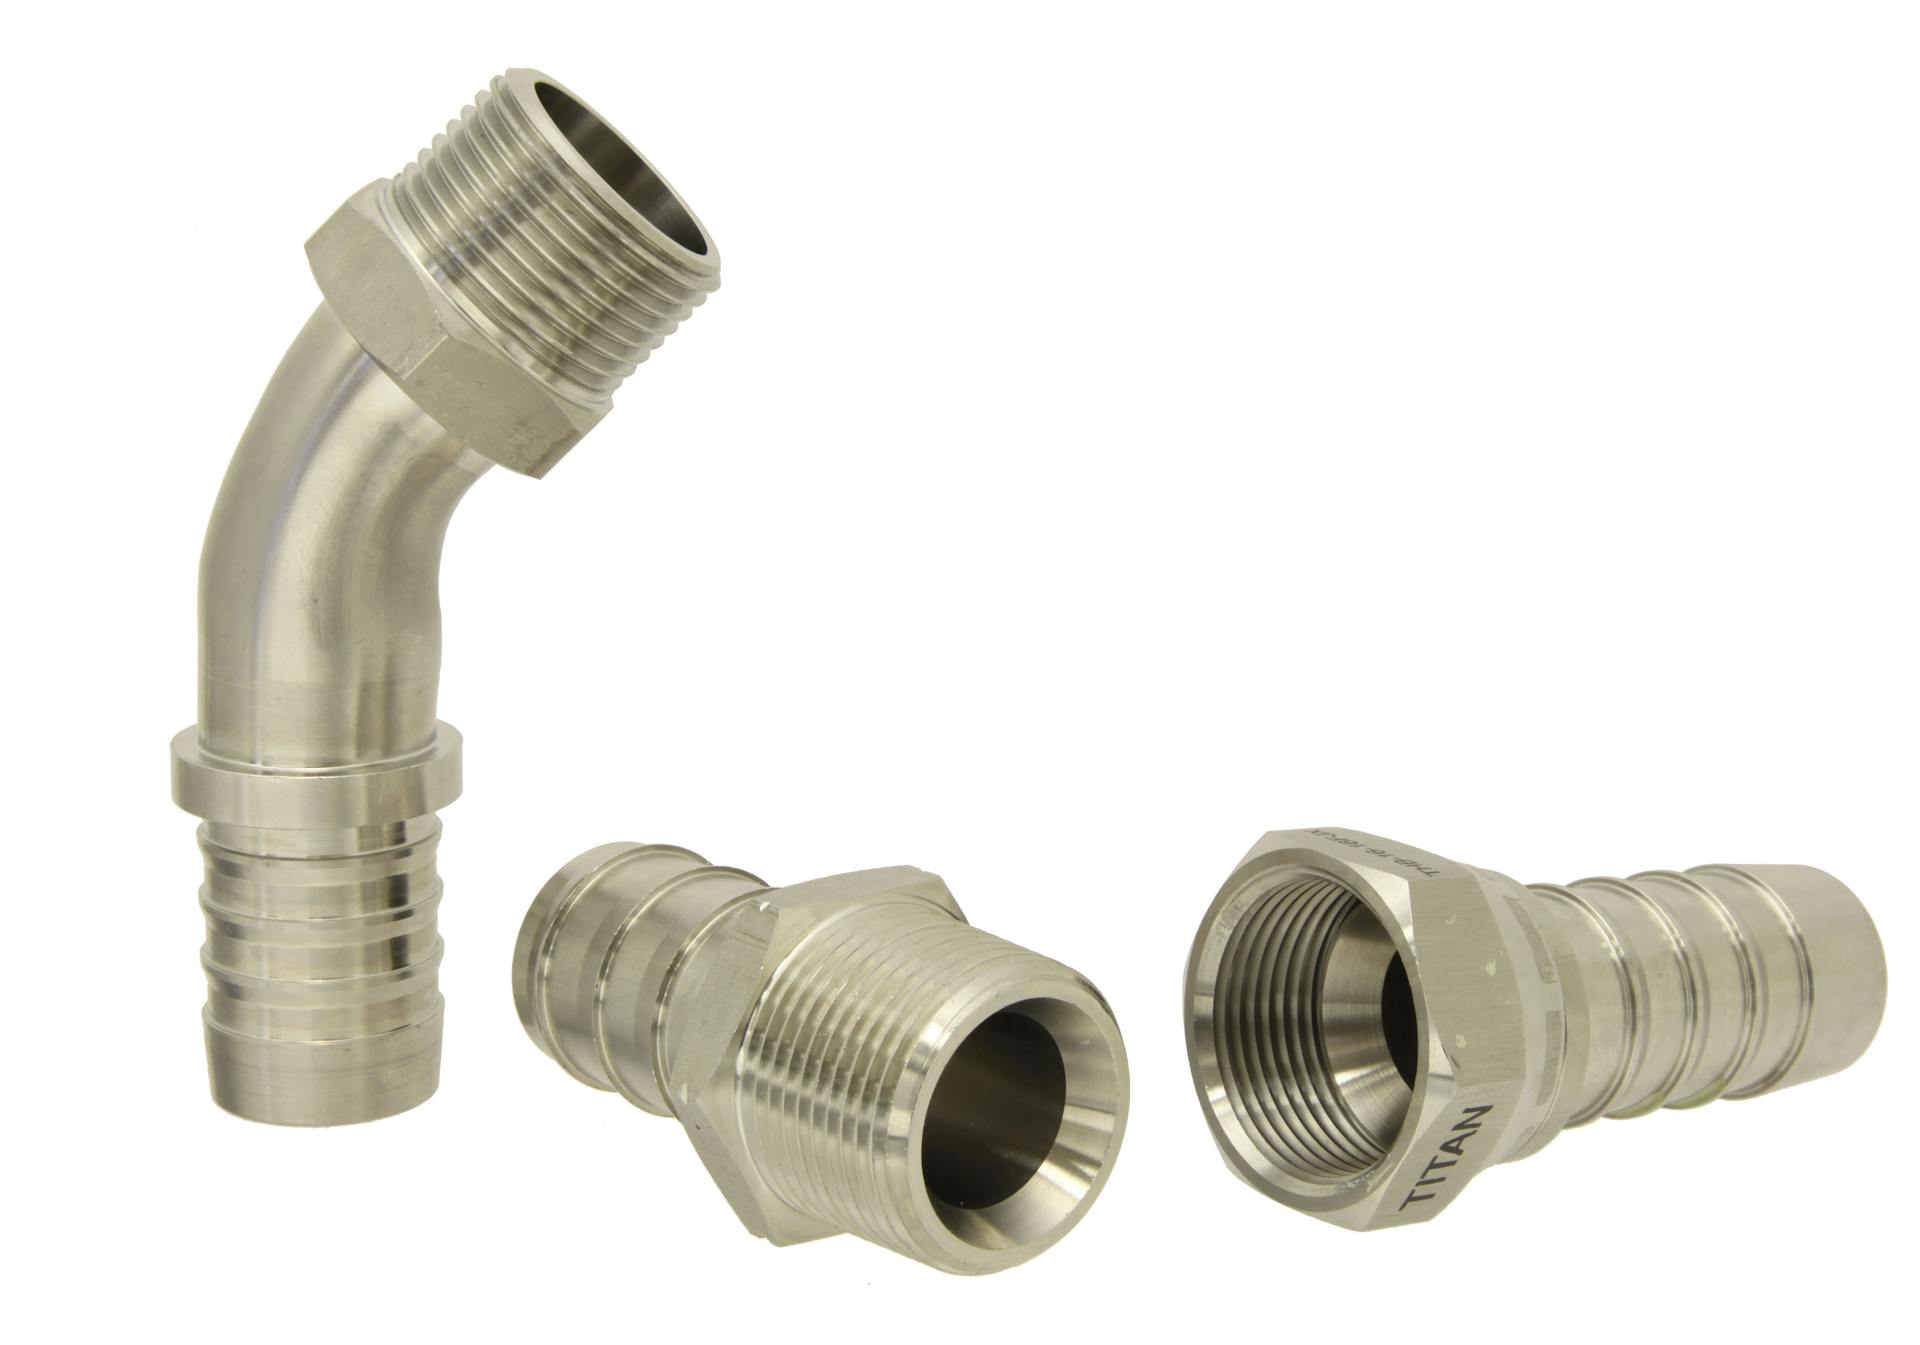 Uses and Considerations for Hose Barb Fittings